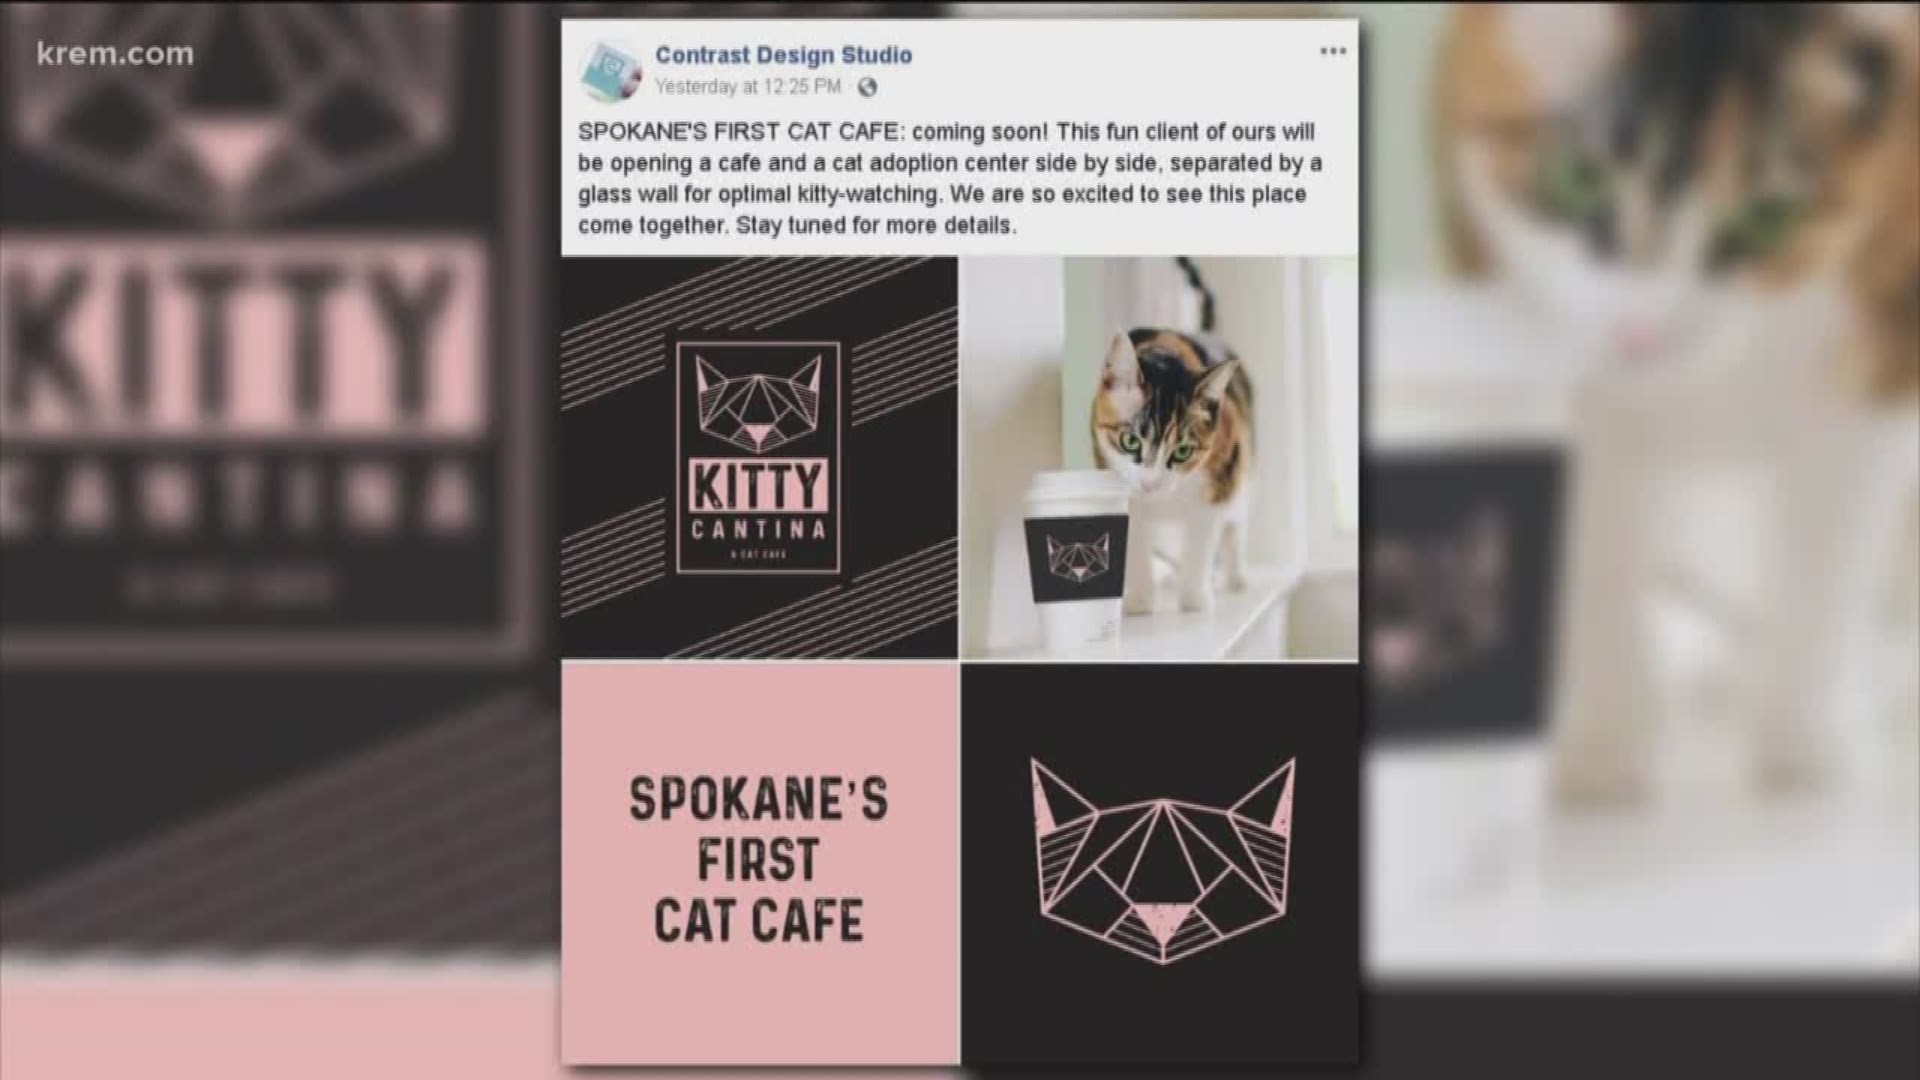 Heads up cat lovers -- there could be a cat cafe coming to Spokane! This post announcing Spokane's first cat cafe is getting a lot of attention. But the owner says there are still a few hurdles to get over before it's a sure thing.